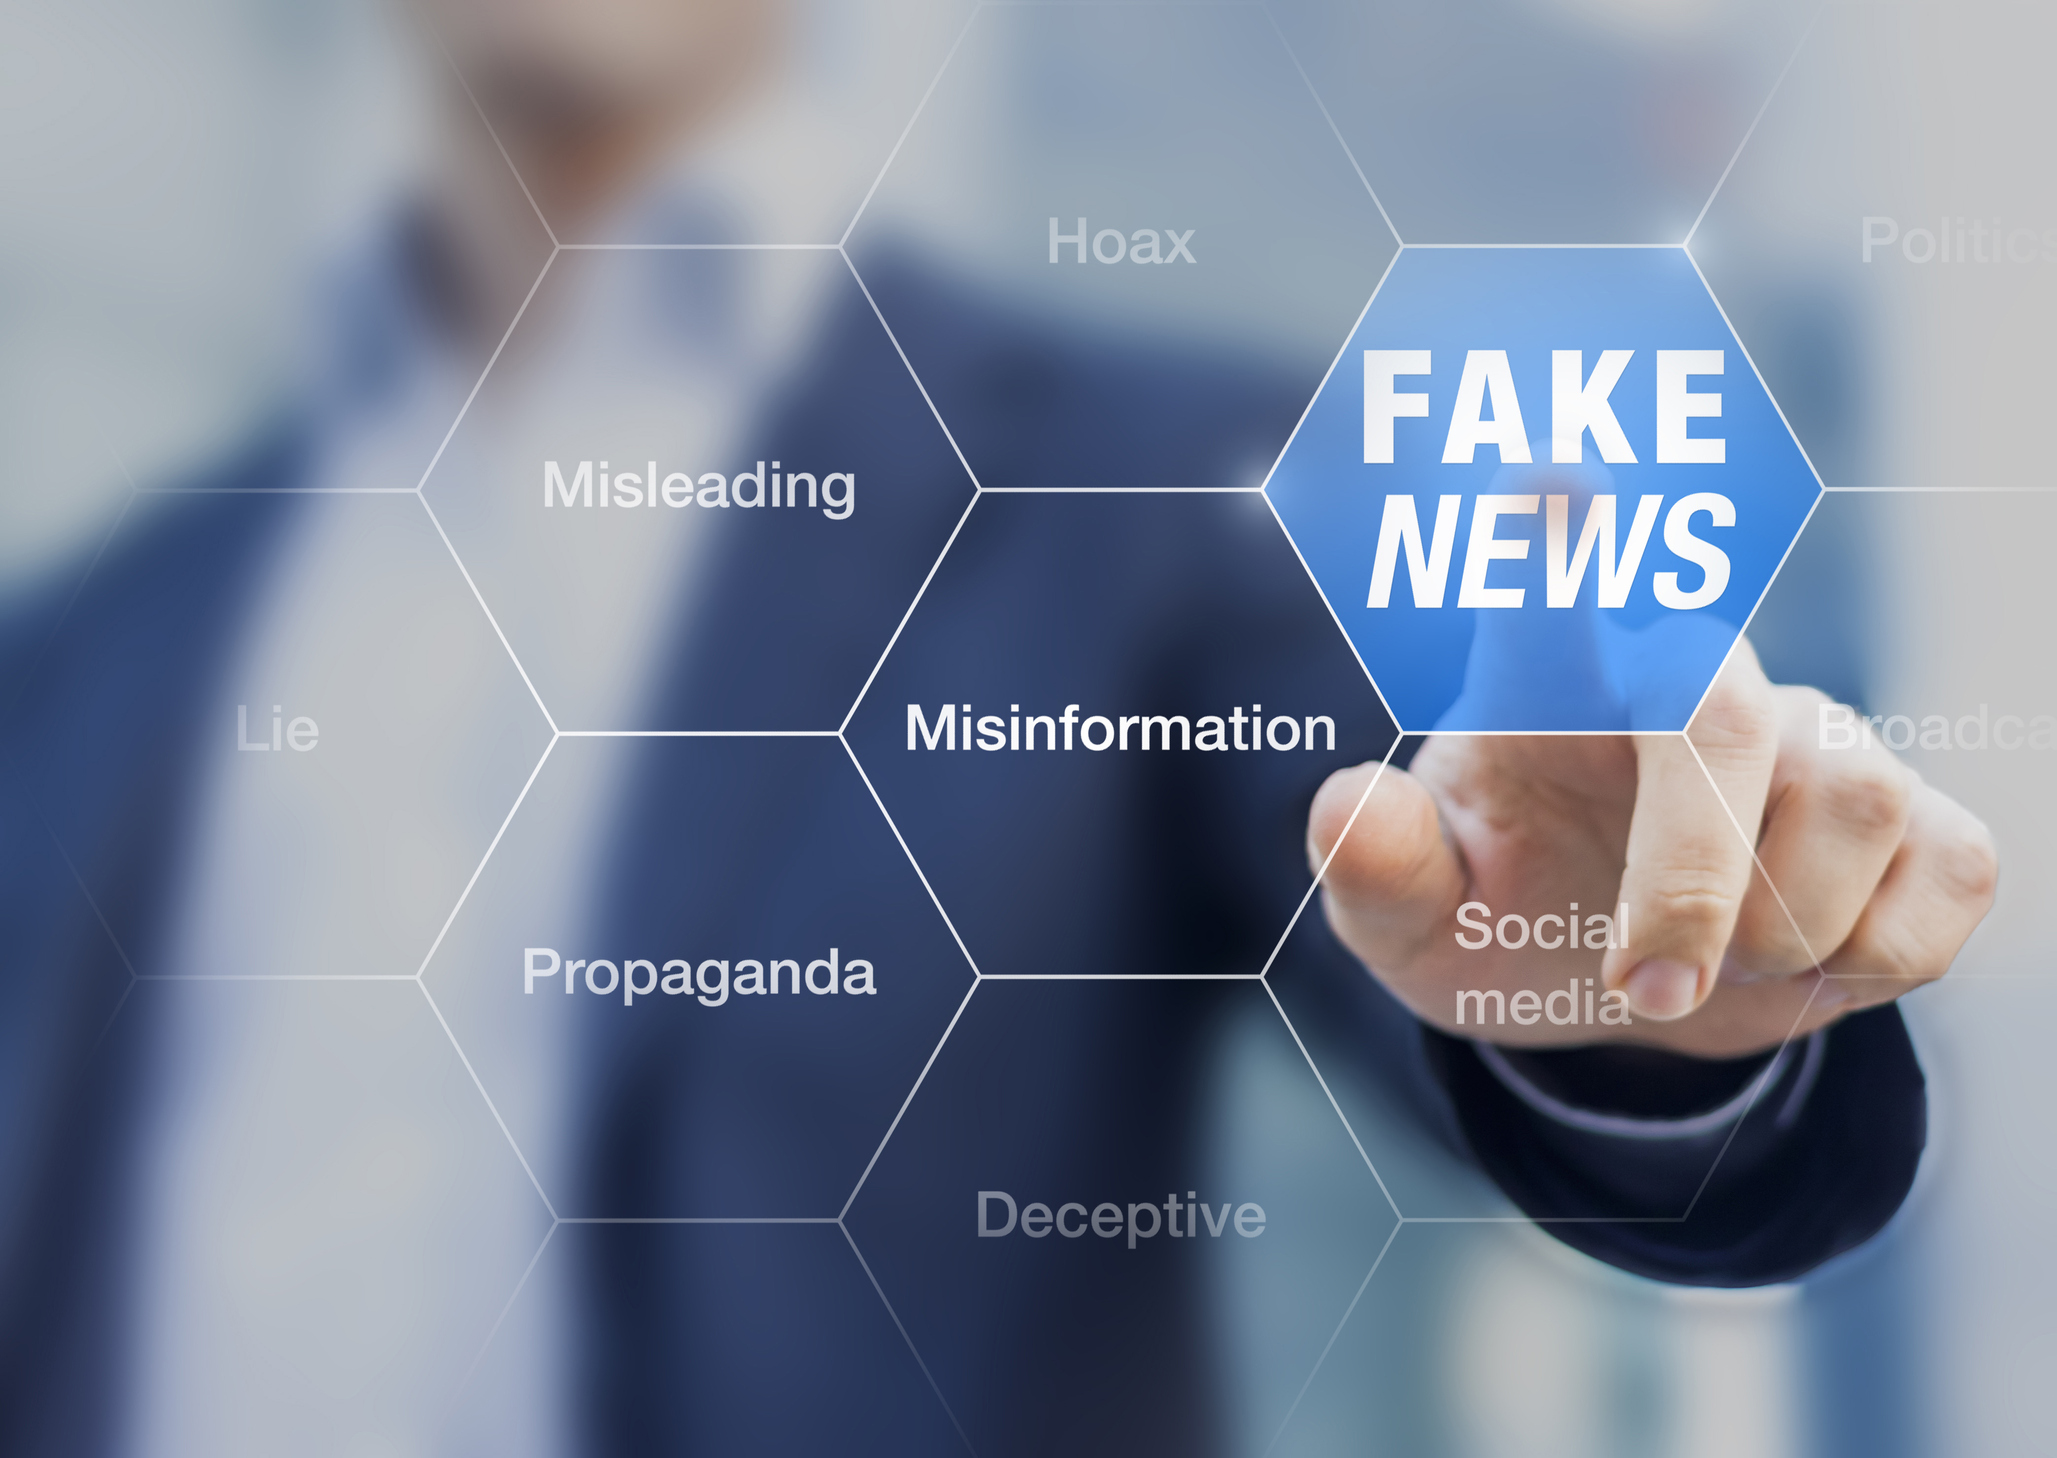 man pointing to various words including "fake news, misinformation, misleading"